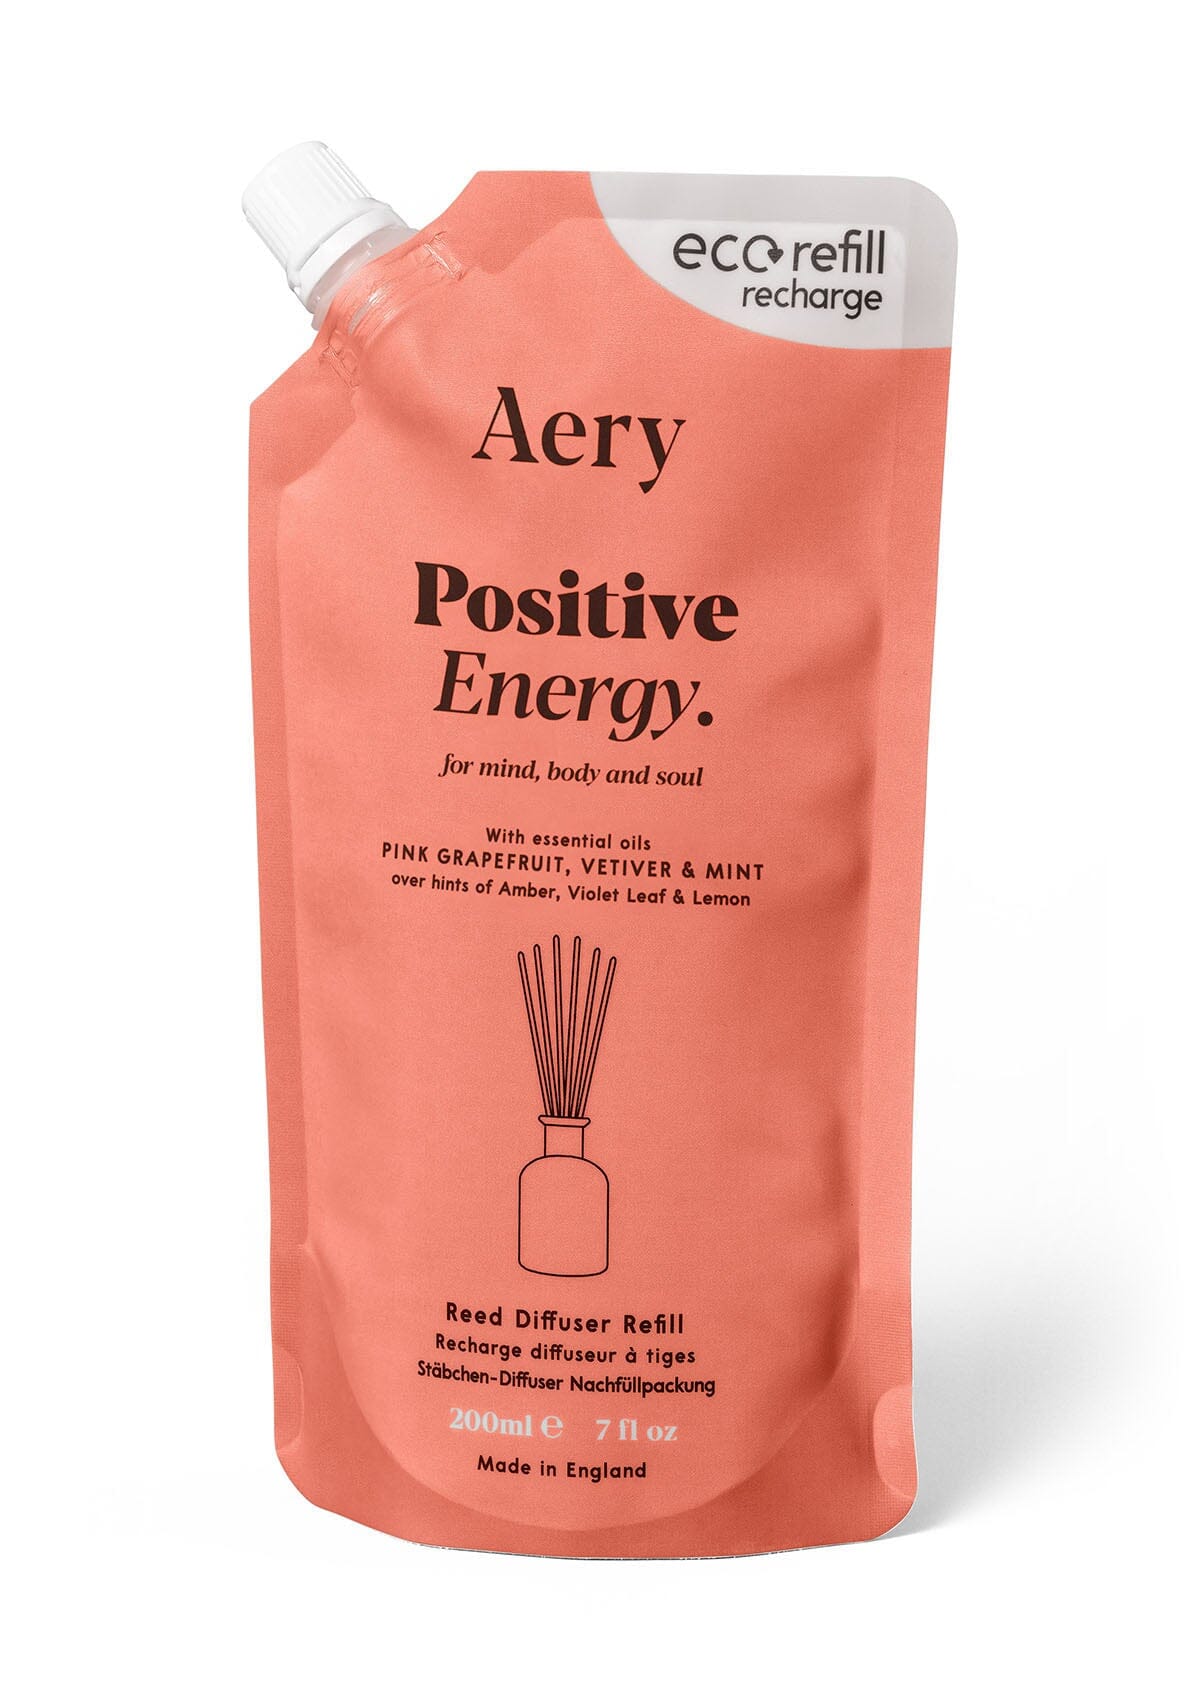 Positive Energy reed diffuser refill pouch by aery displayed on white background 